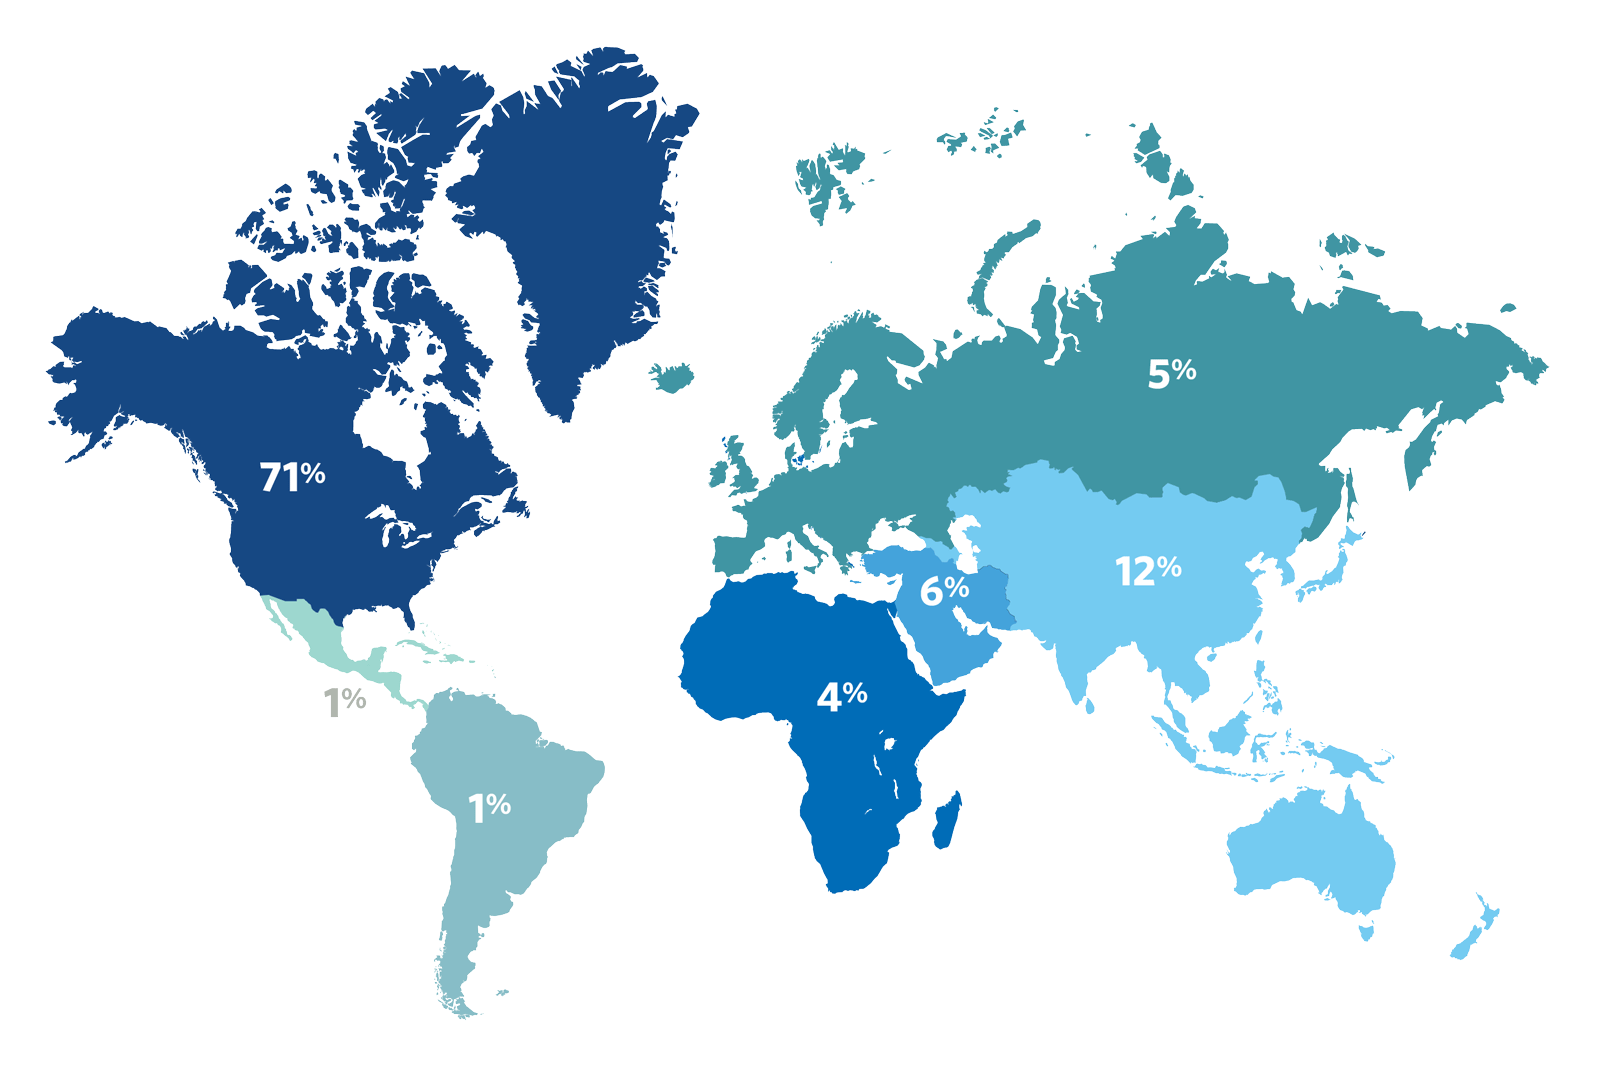 High-Potential Leaders participants by region